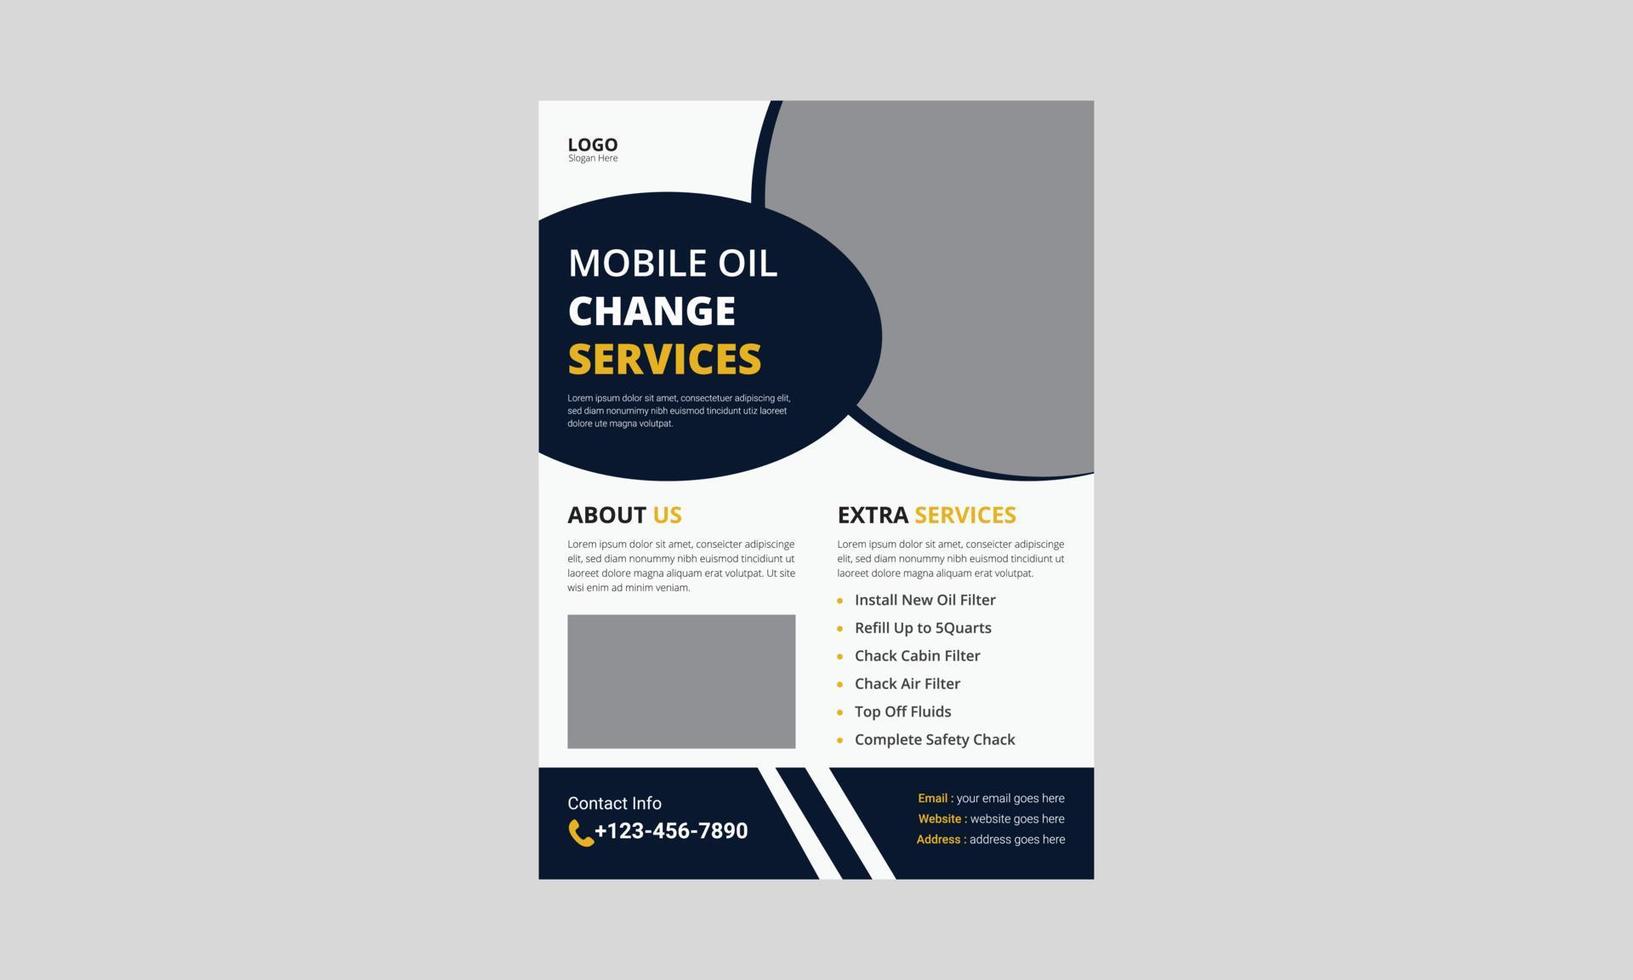 Oil Change Service Flyer Template. Auto Service flyer leaflet design. Automotive Service flyer design. cover, a4 size, flyer, poster, print ready vector